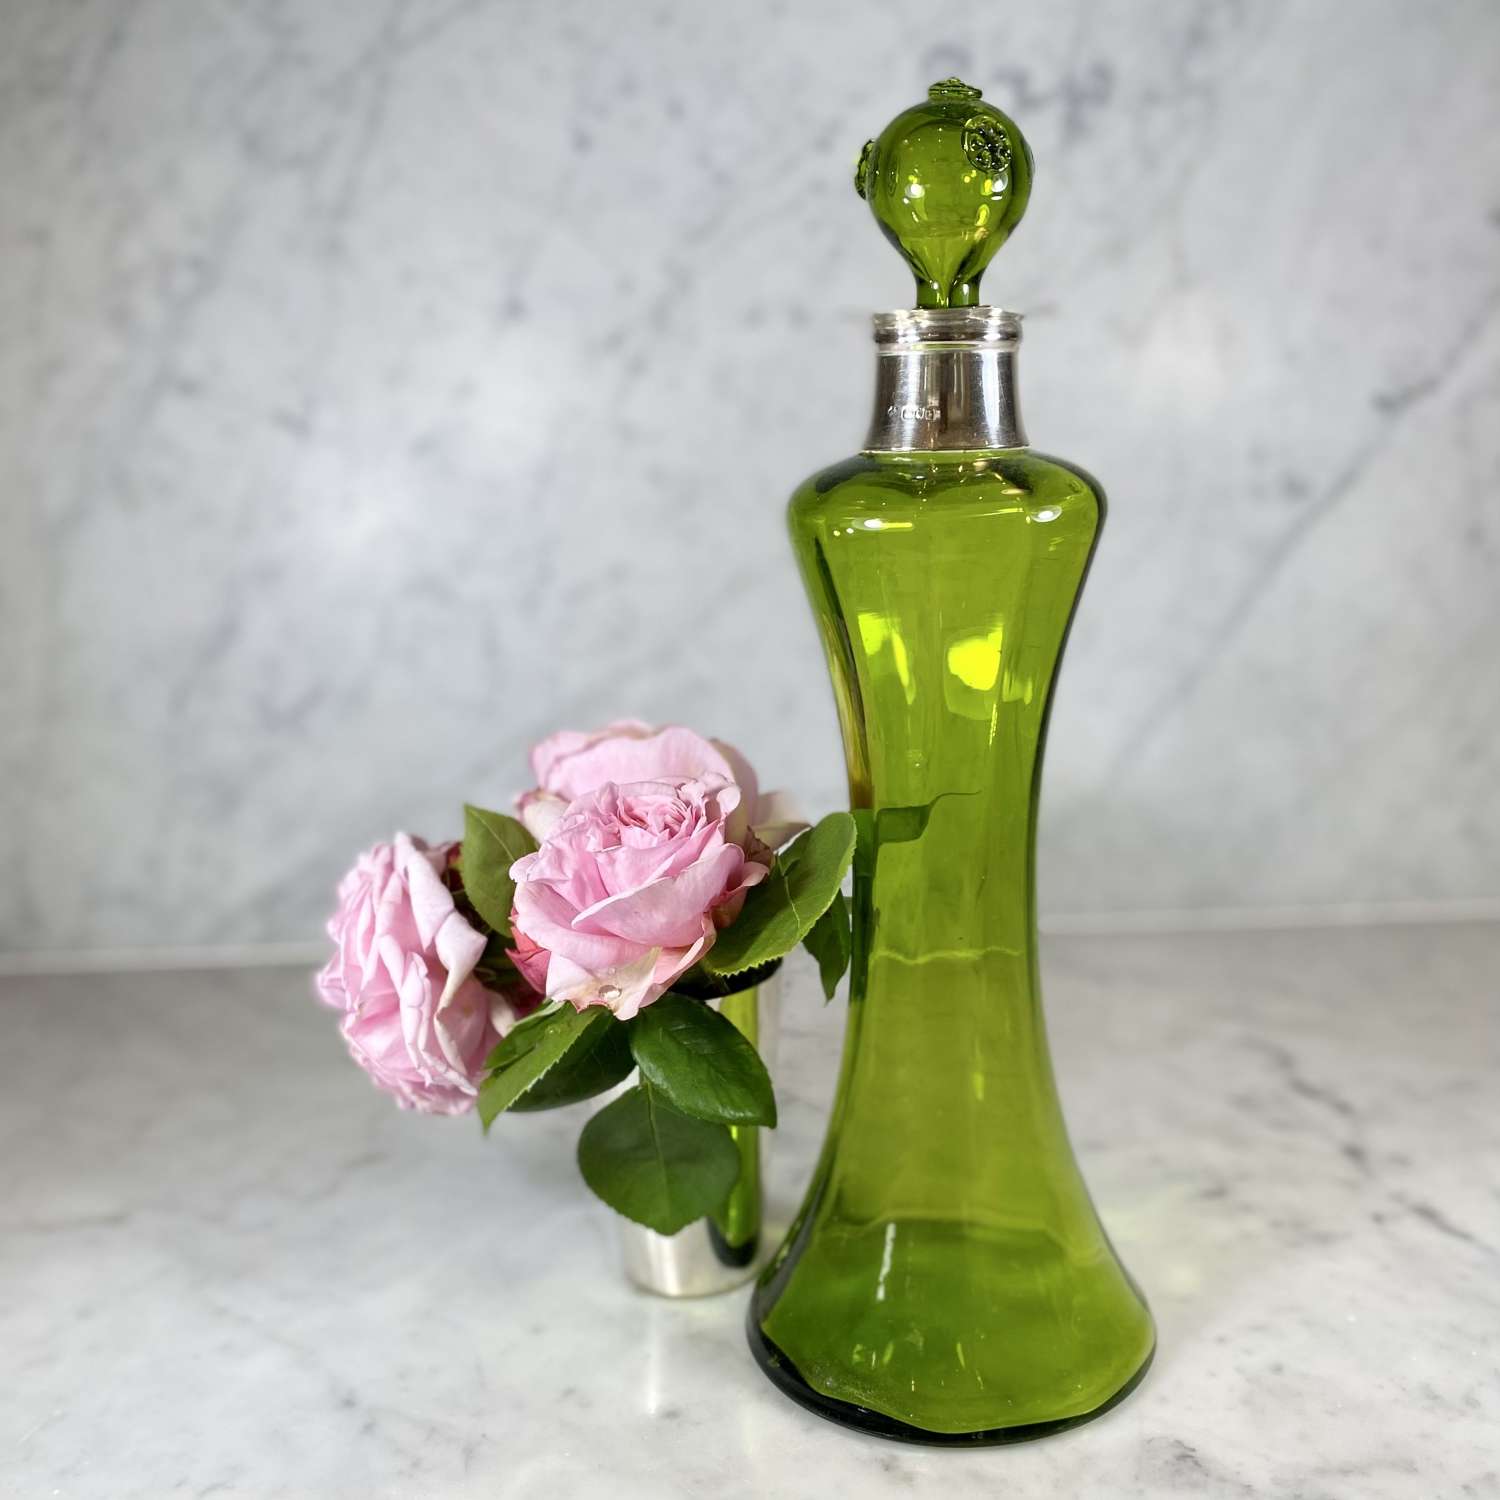 Art Nouveau green glass decanter with silver collar by William Hutton